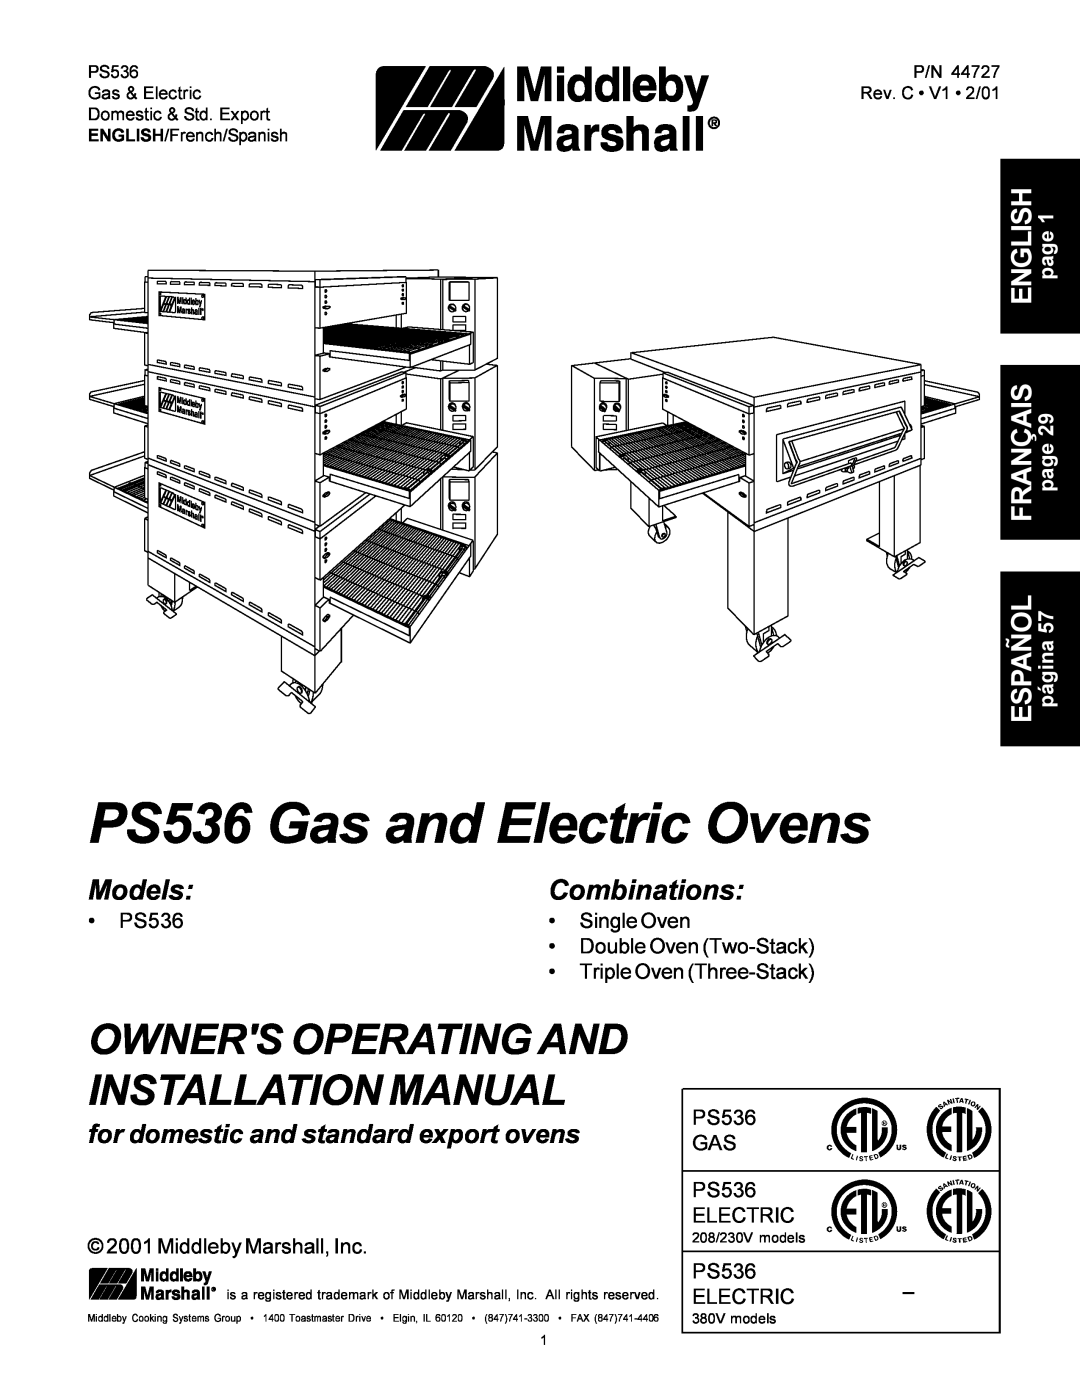 Middleby Marshall Model PS536 installation manual PS536 Gas and Electric Ovens, Owners Operating And Installation Manual 